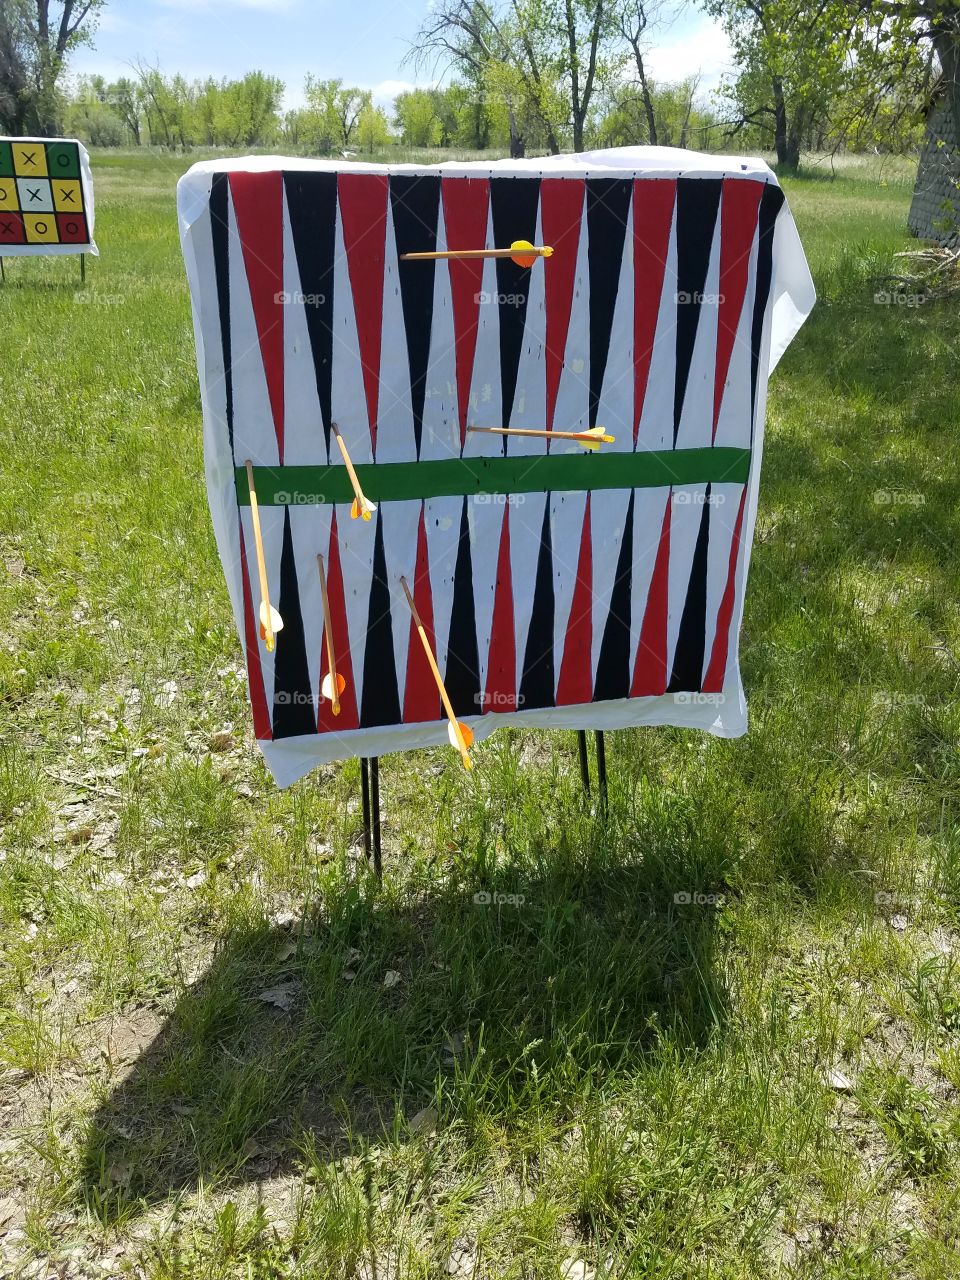 An archery target designed to look like a backgammon board with arrows peppering the board.   The target stands in a field on a beautiful sunny day.